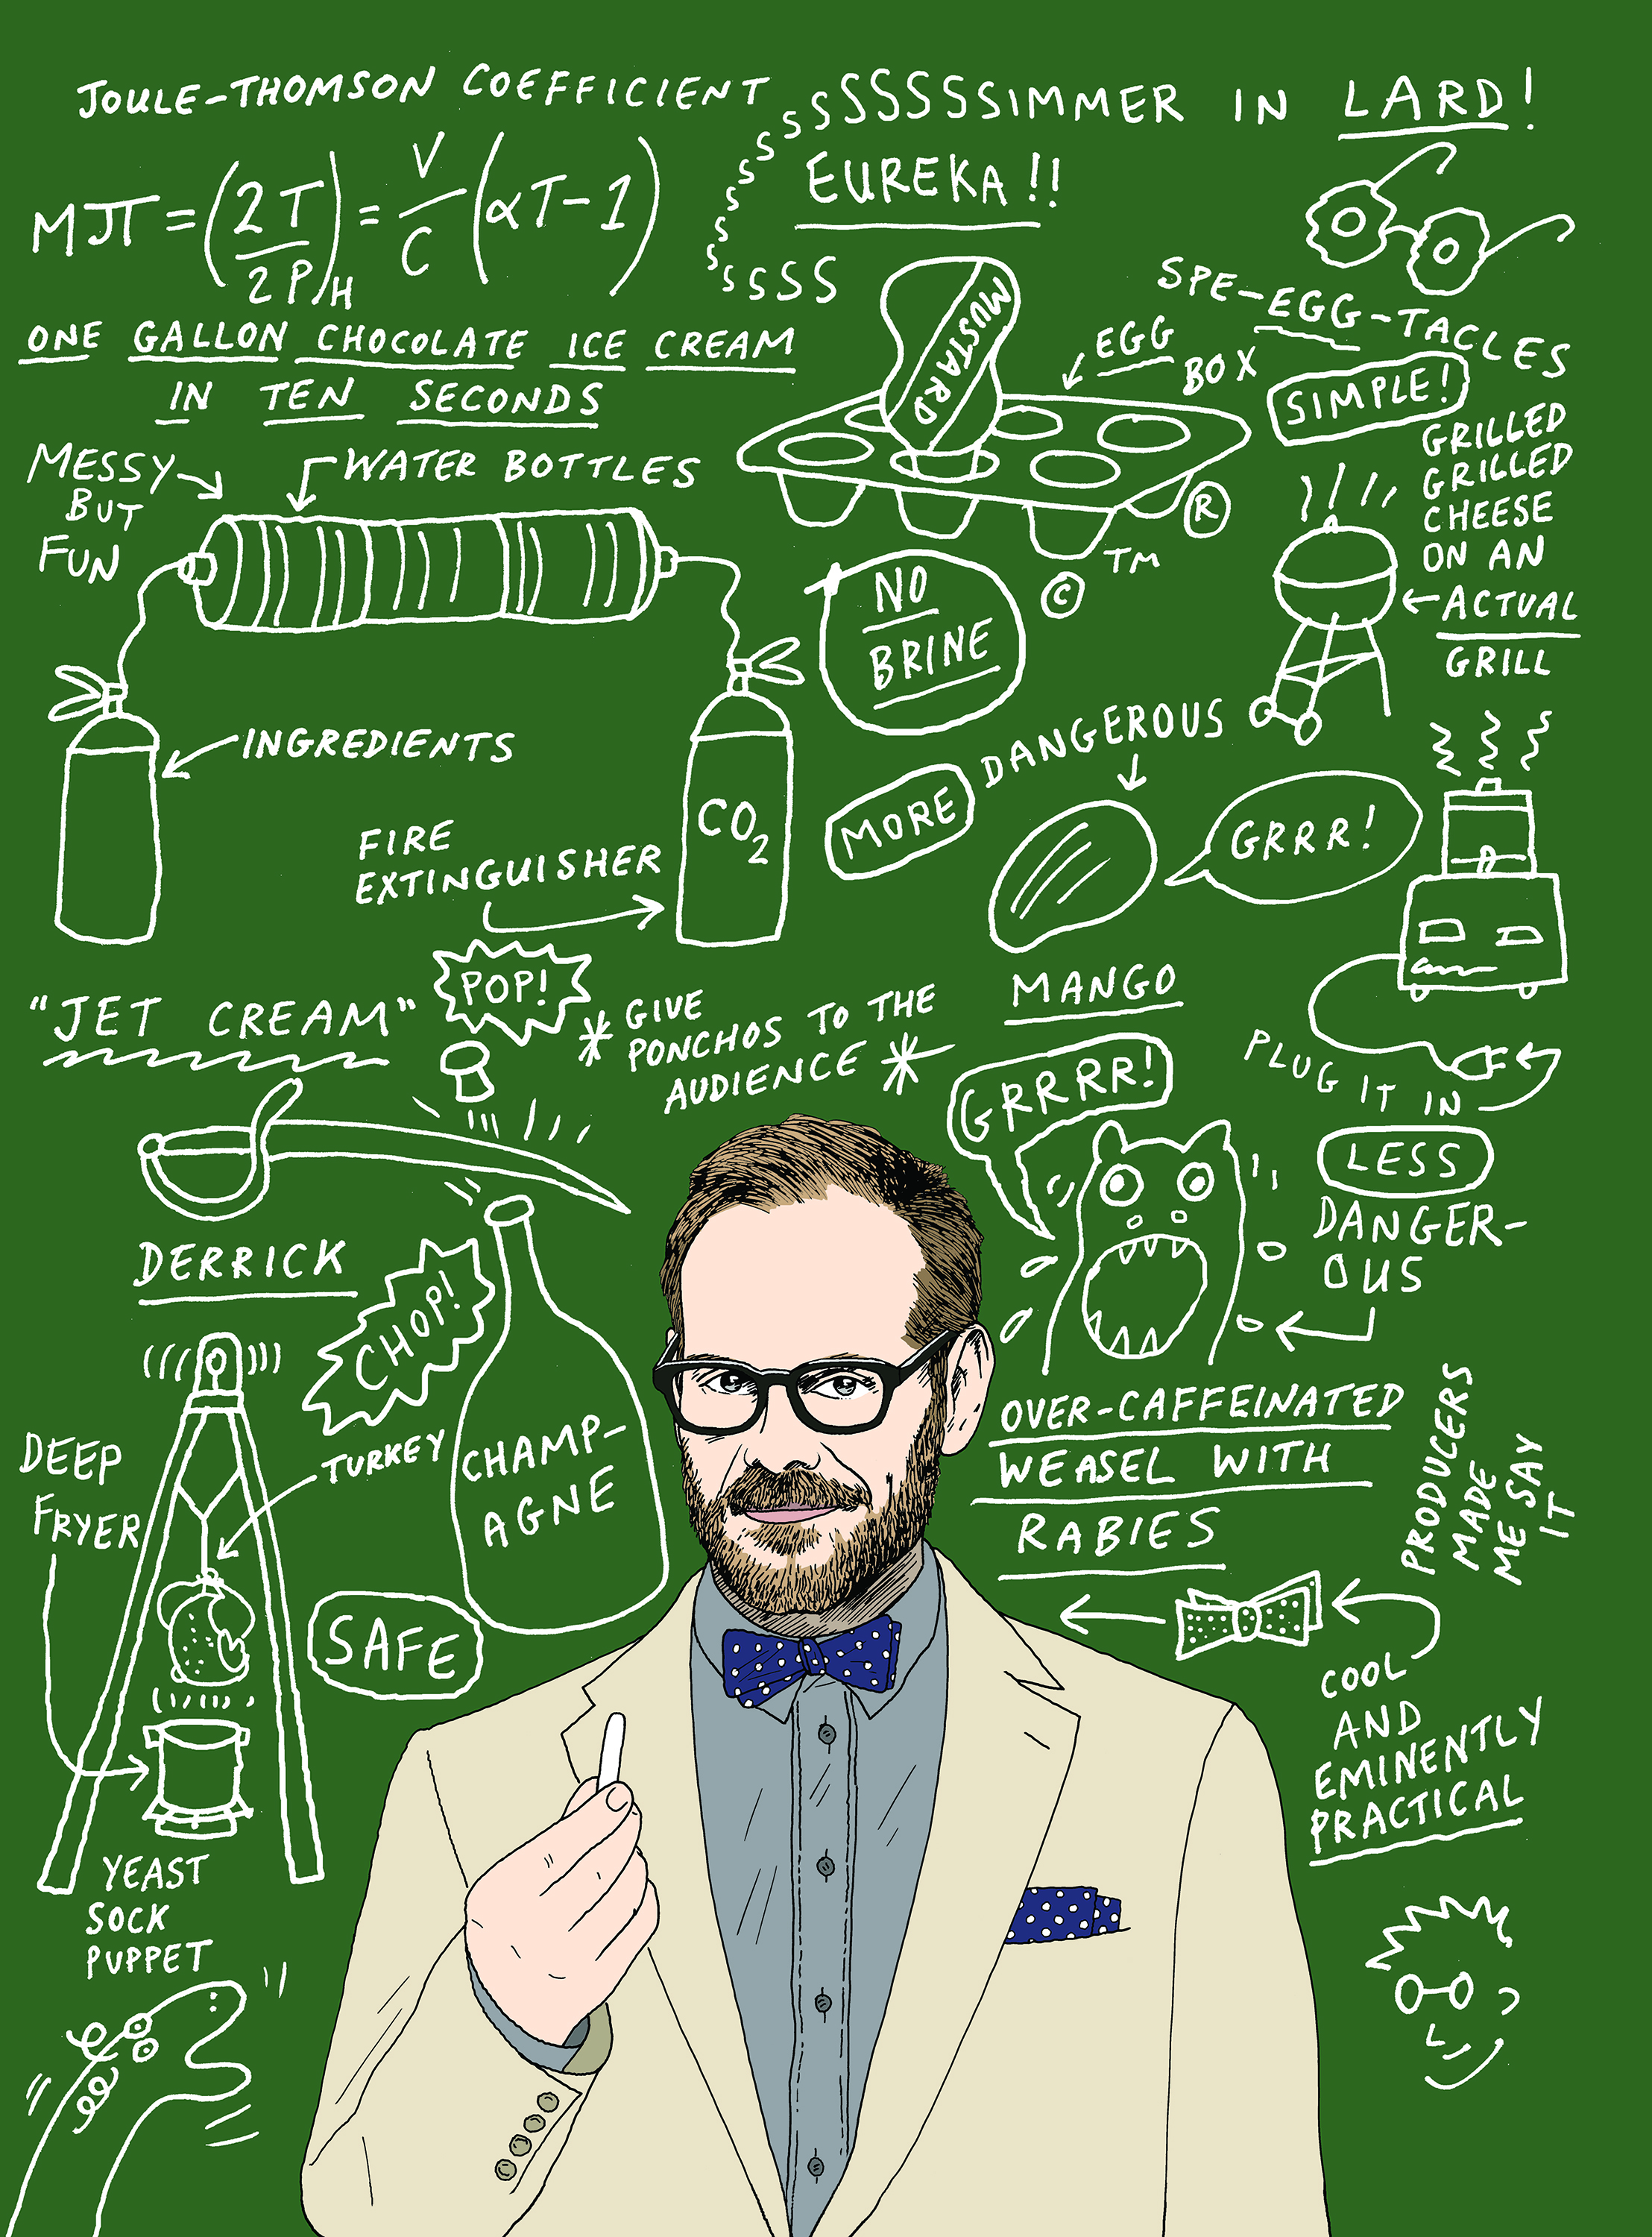 Gastronomy as grand spectacle: Brown mesmerizes fans with detailed, frequently hilarious explanations of the science behind traditional cooking techniques. (Illustration by Peter Arkle for TIME)